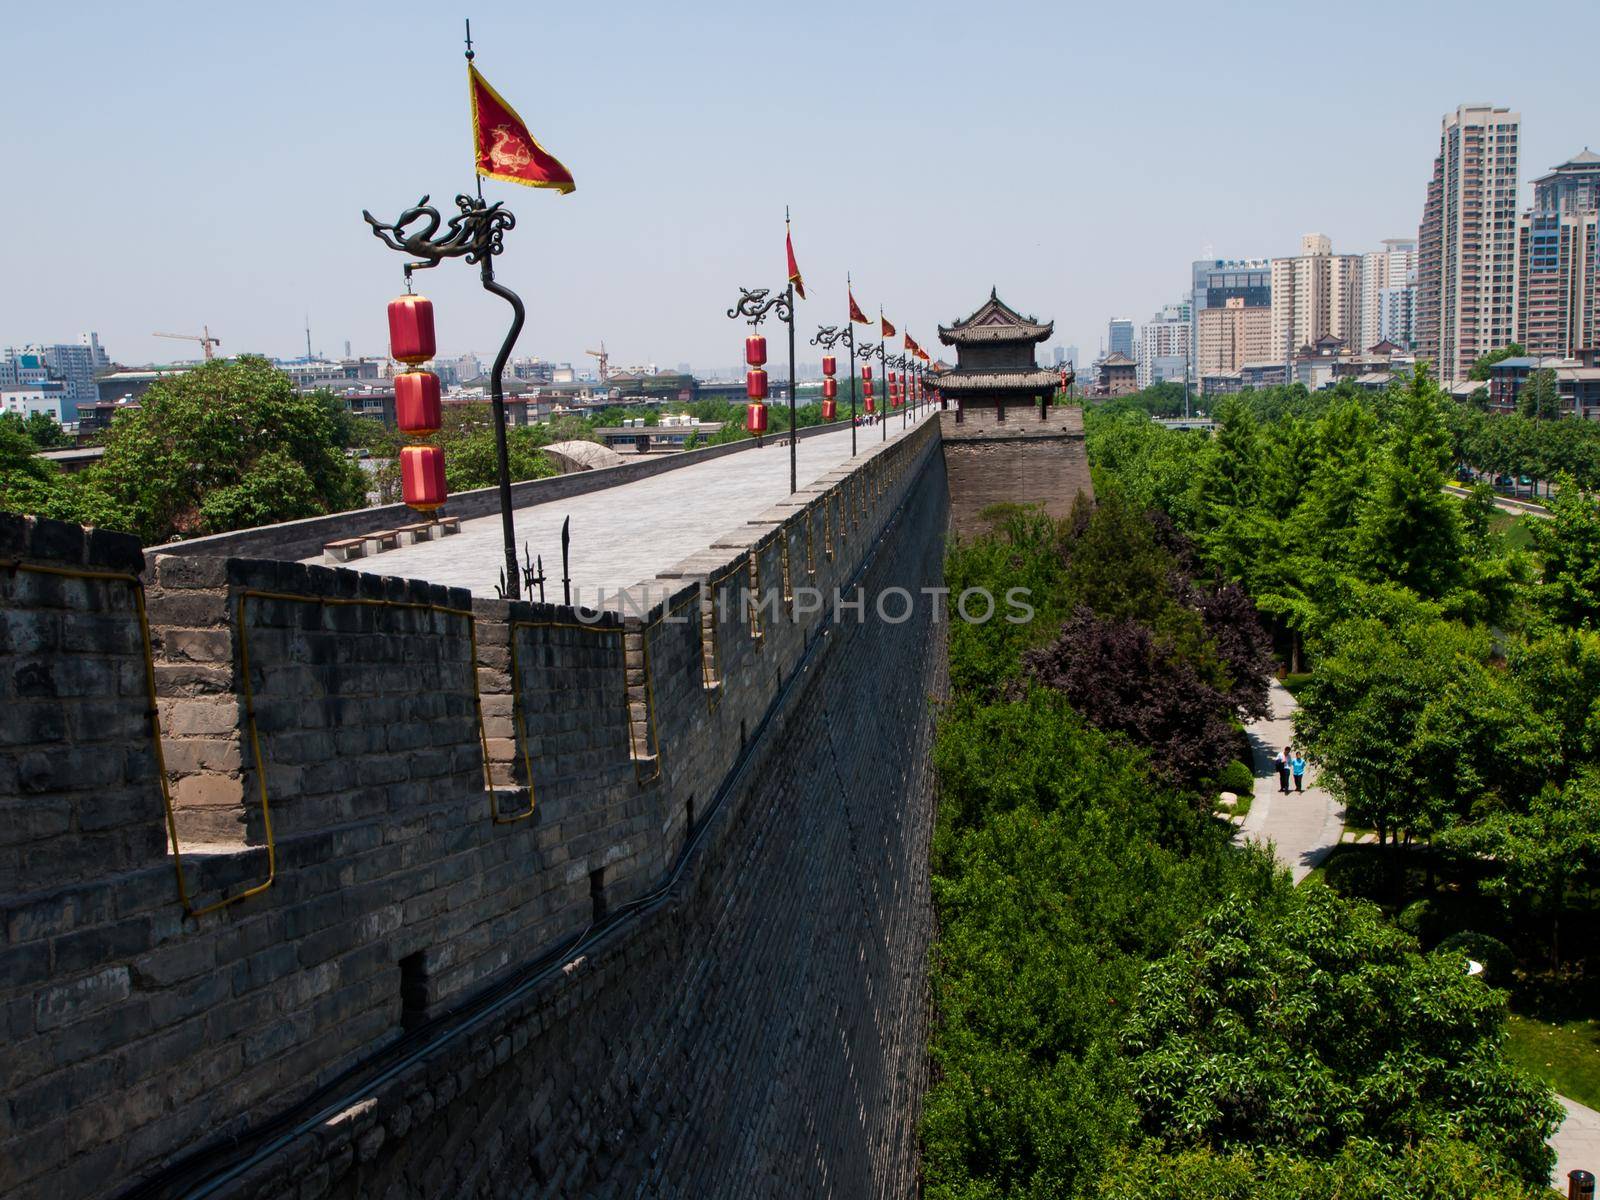 Xian ancient city wall with pagodas.